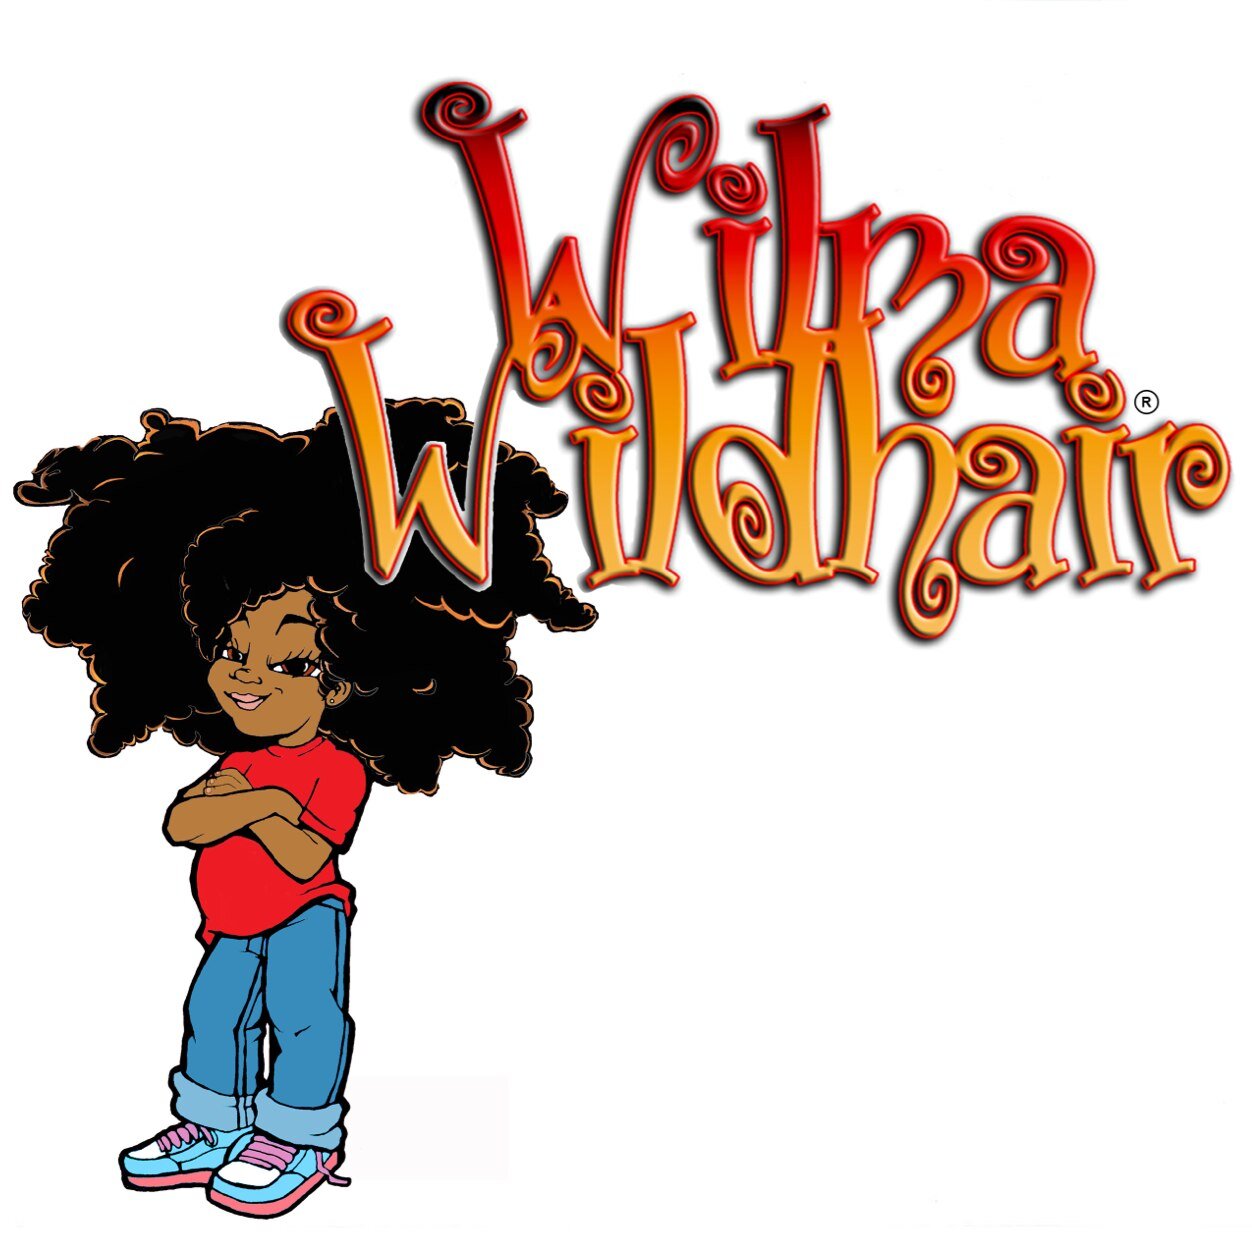 Wilma is a spunky 8 yr. old who loves science & her wild curls. Forget the dresses, follow this tomboy in a children's book series about her wild adventures.